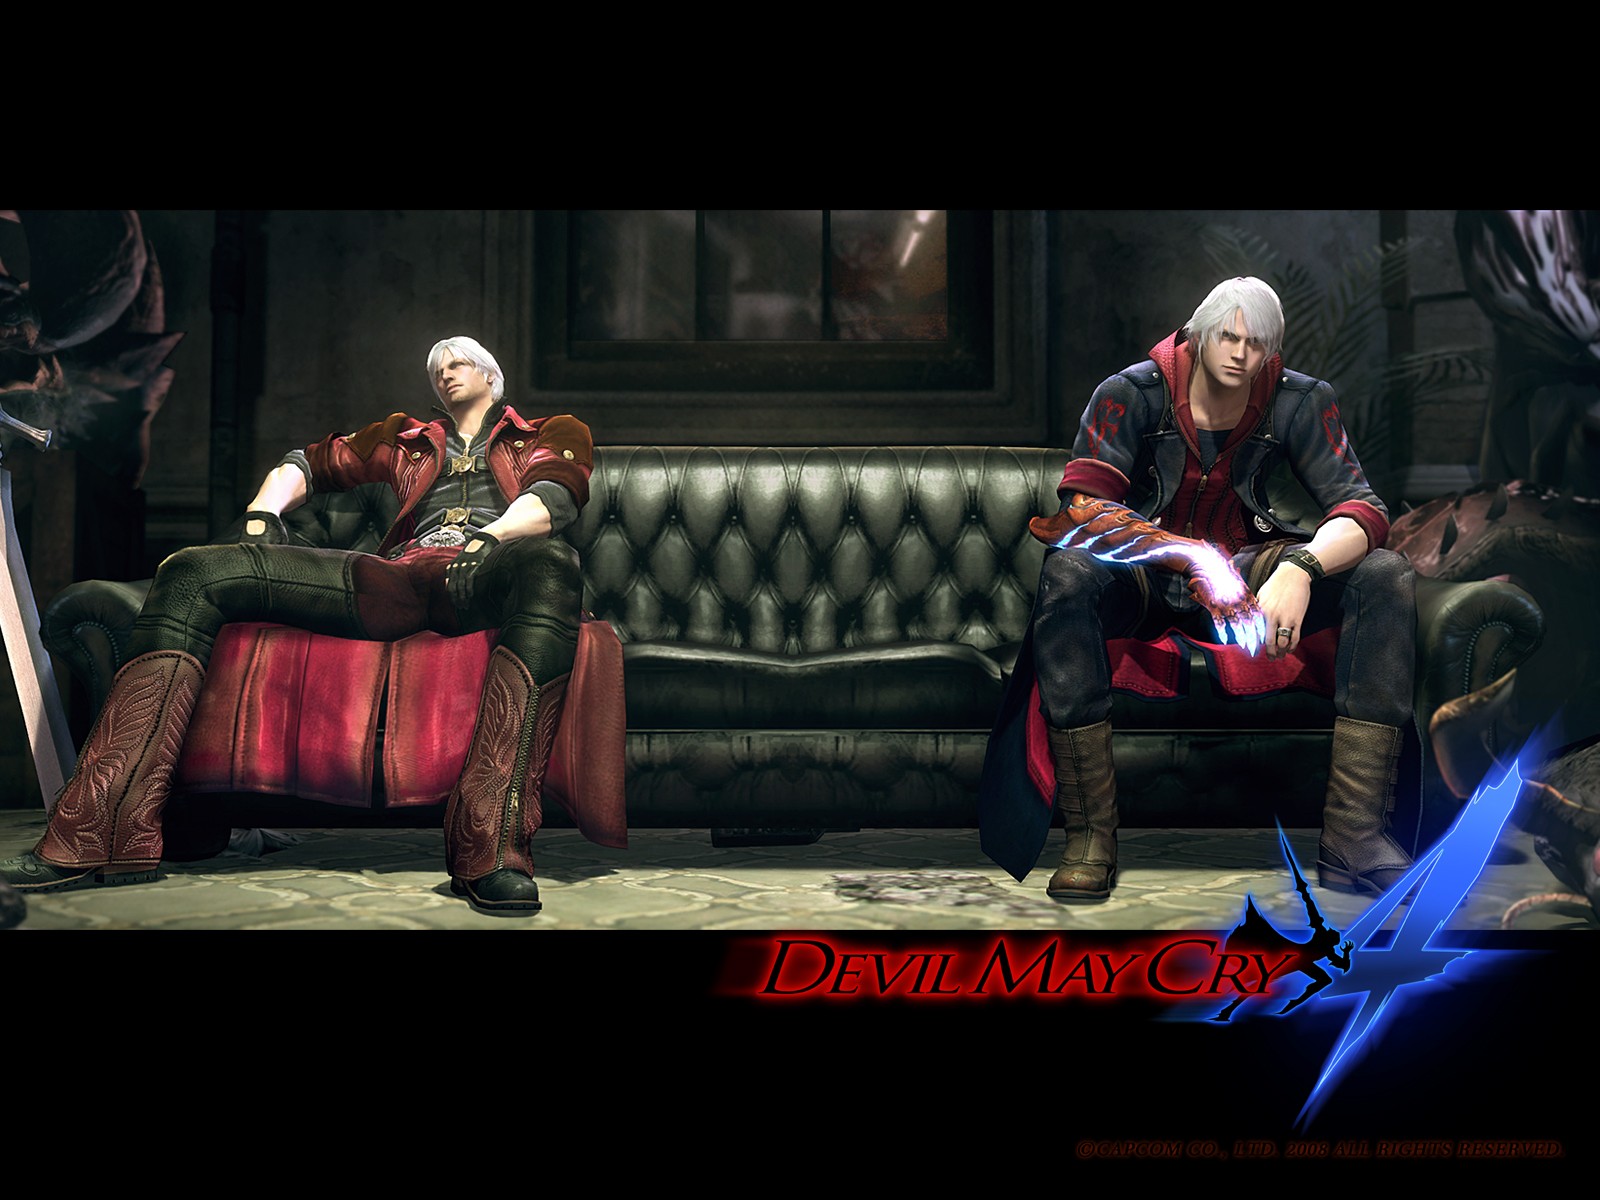 Gallery For > Devil May Cry 4 Wallpapers